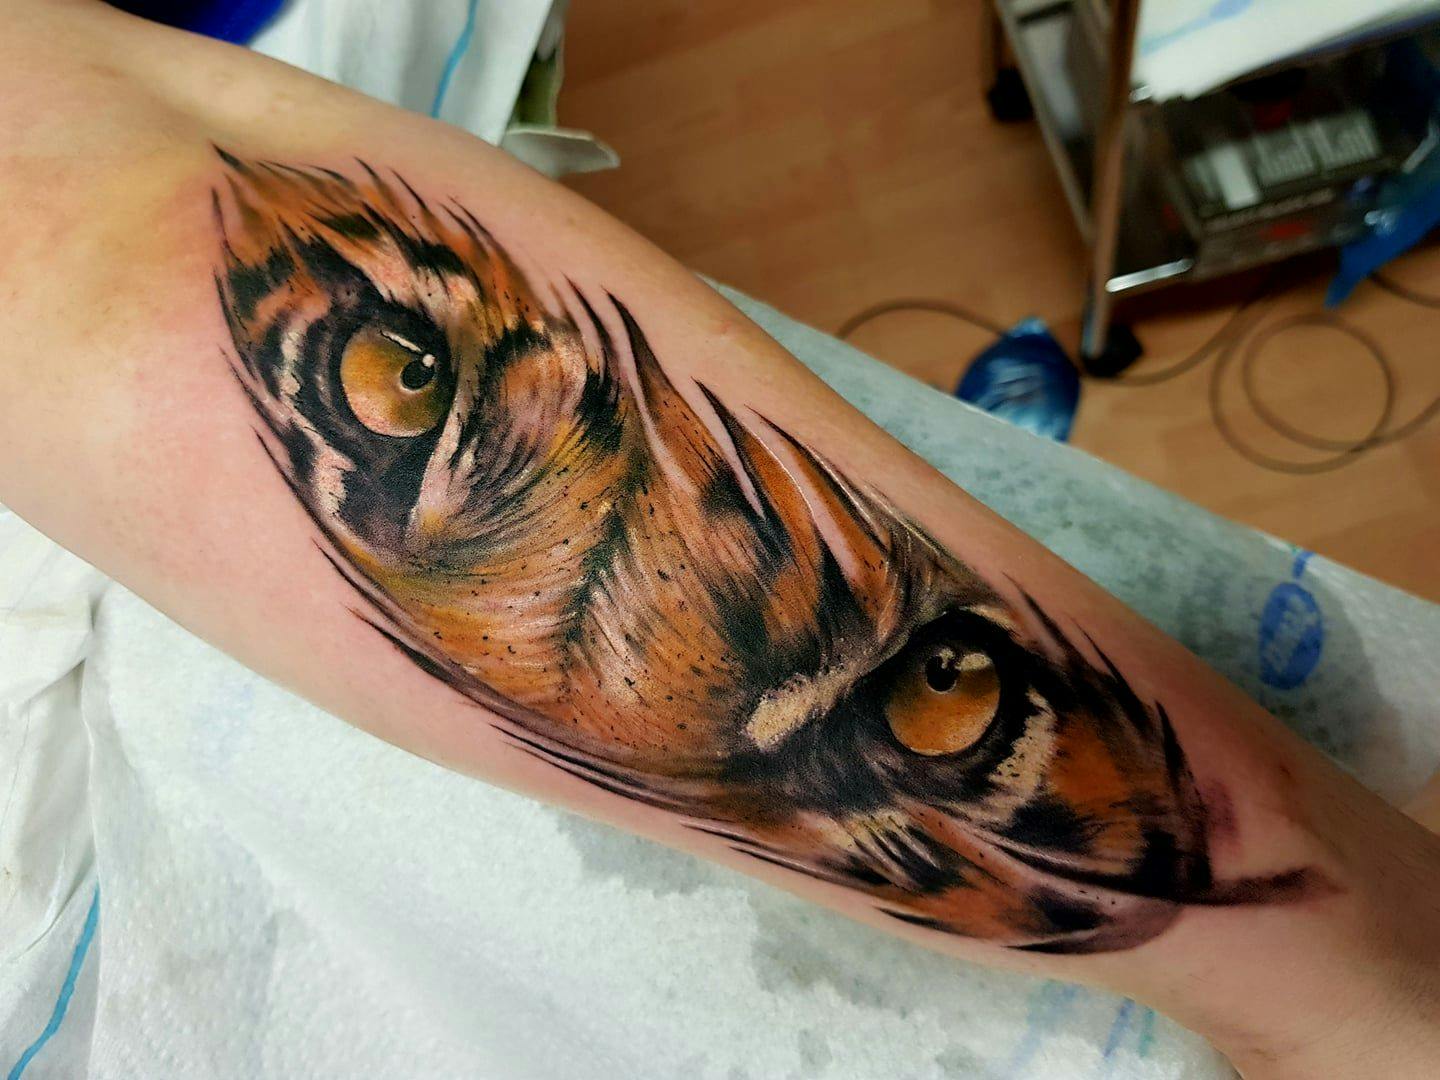 a narben tattoo of a tiger's head on the arm, hamburg, germany